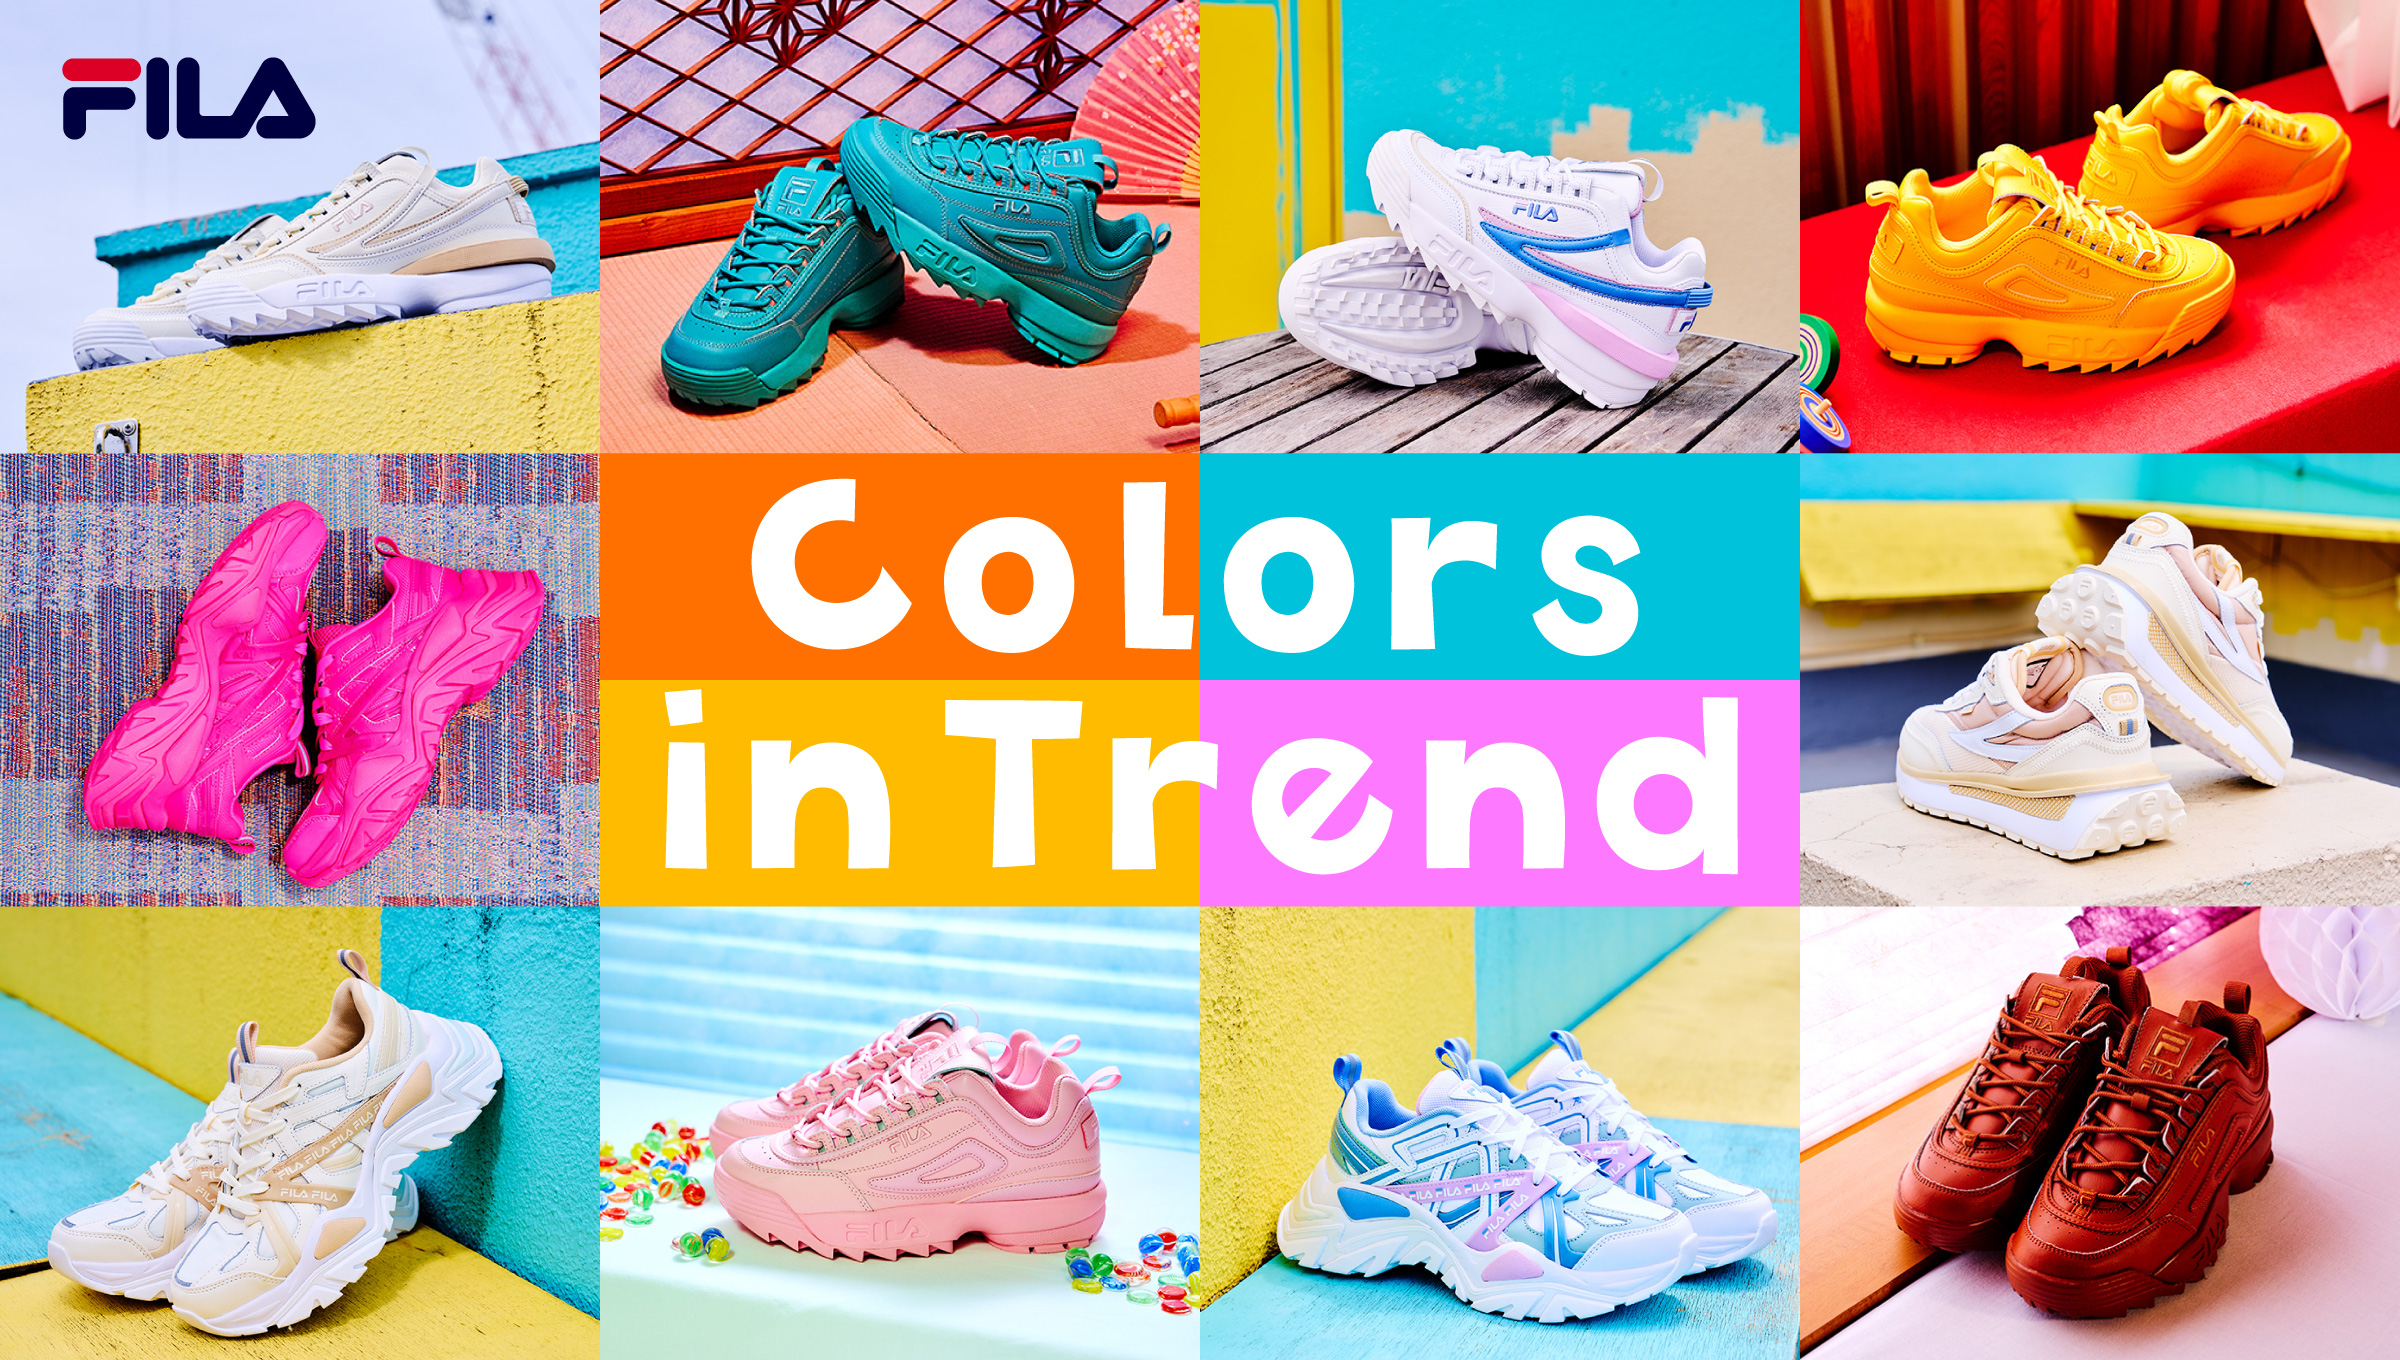 CoLors in Trend